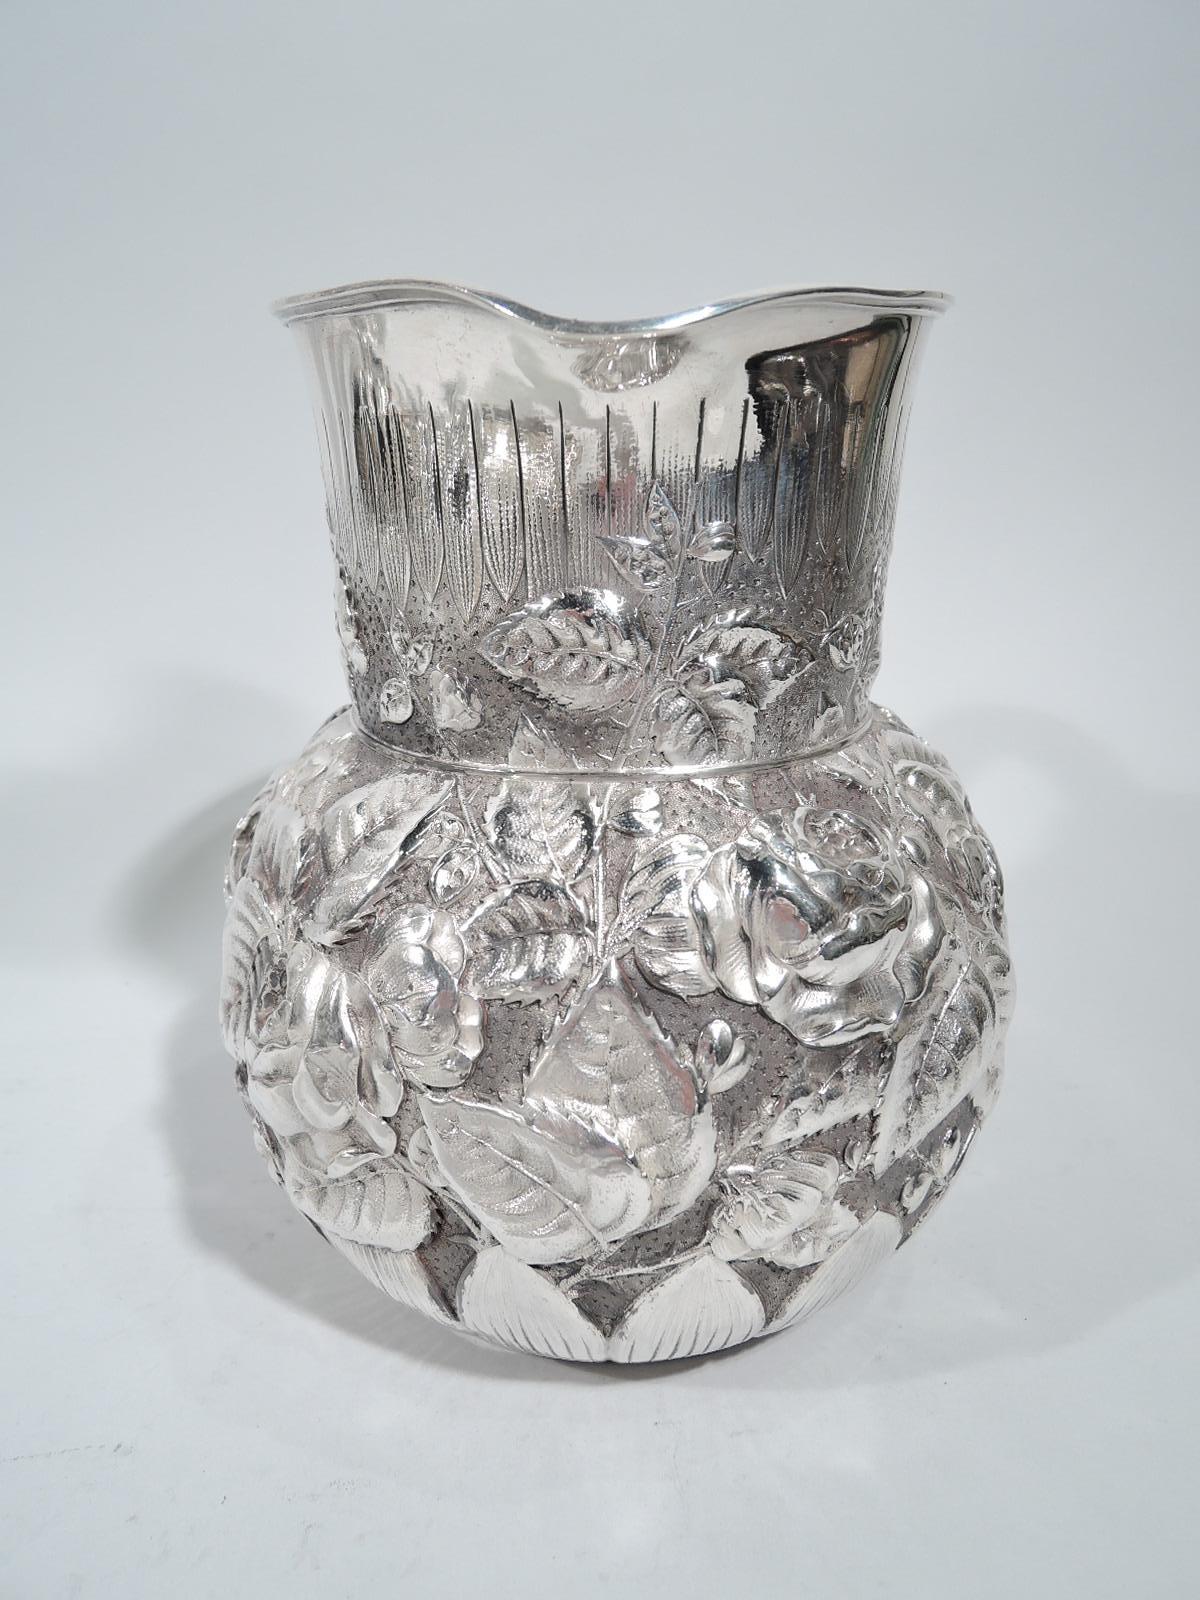 Unusual sterling silver water pitcher. Made by Tiffany & Co. in New York. Globular bowl, straight neck with gently lip spout, and C-scroll handle. Floral repousse in form of pell-mell blooms on stippled ground. Chased vertical leaf border on base.